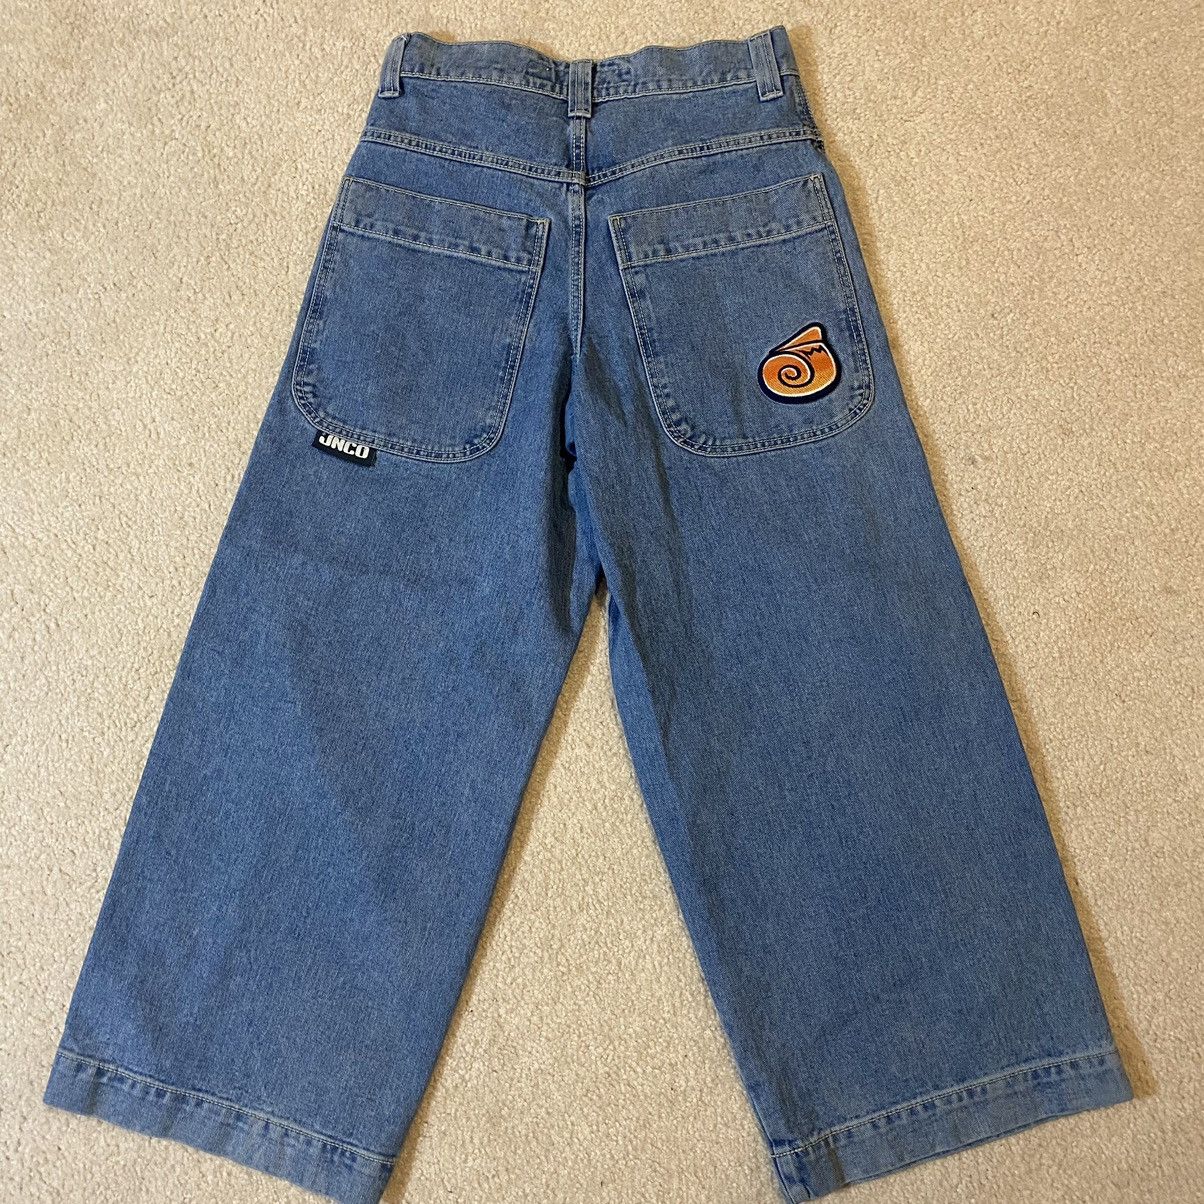 Jnco Jnco jeans twin cannon | Grailed